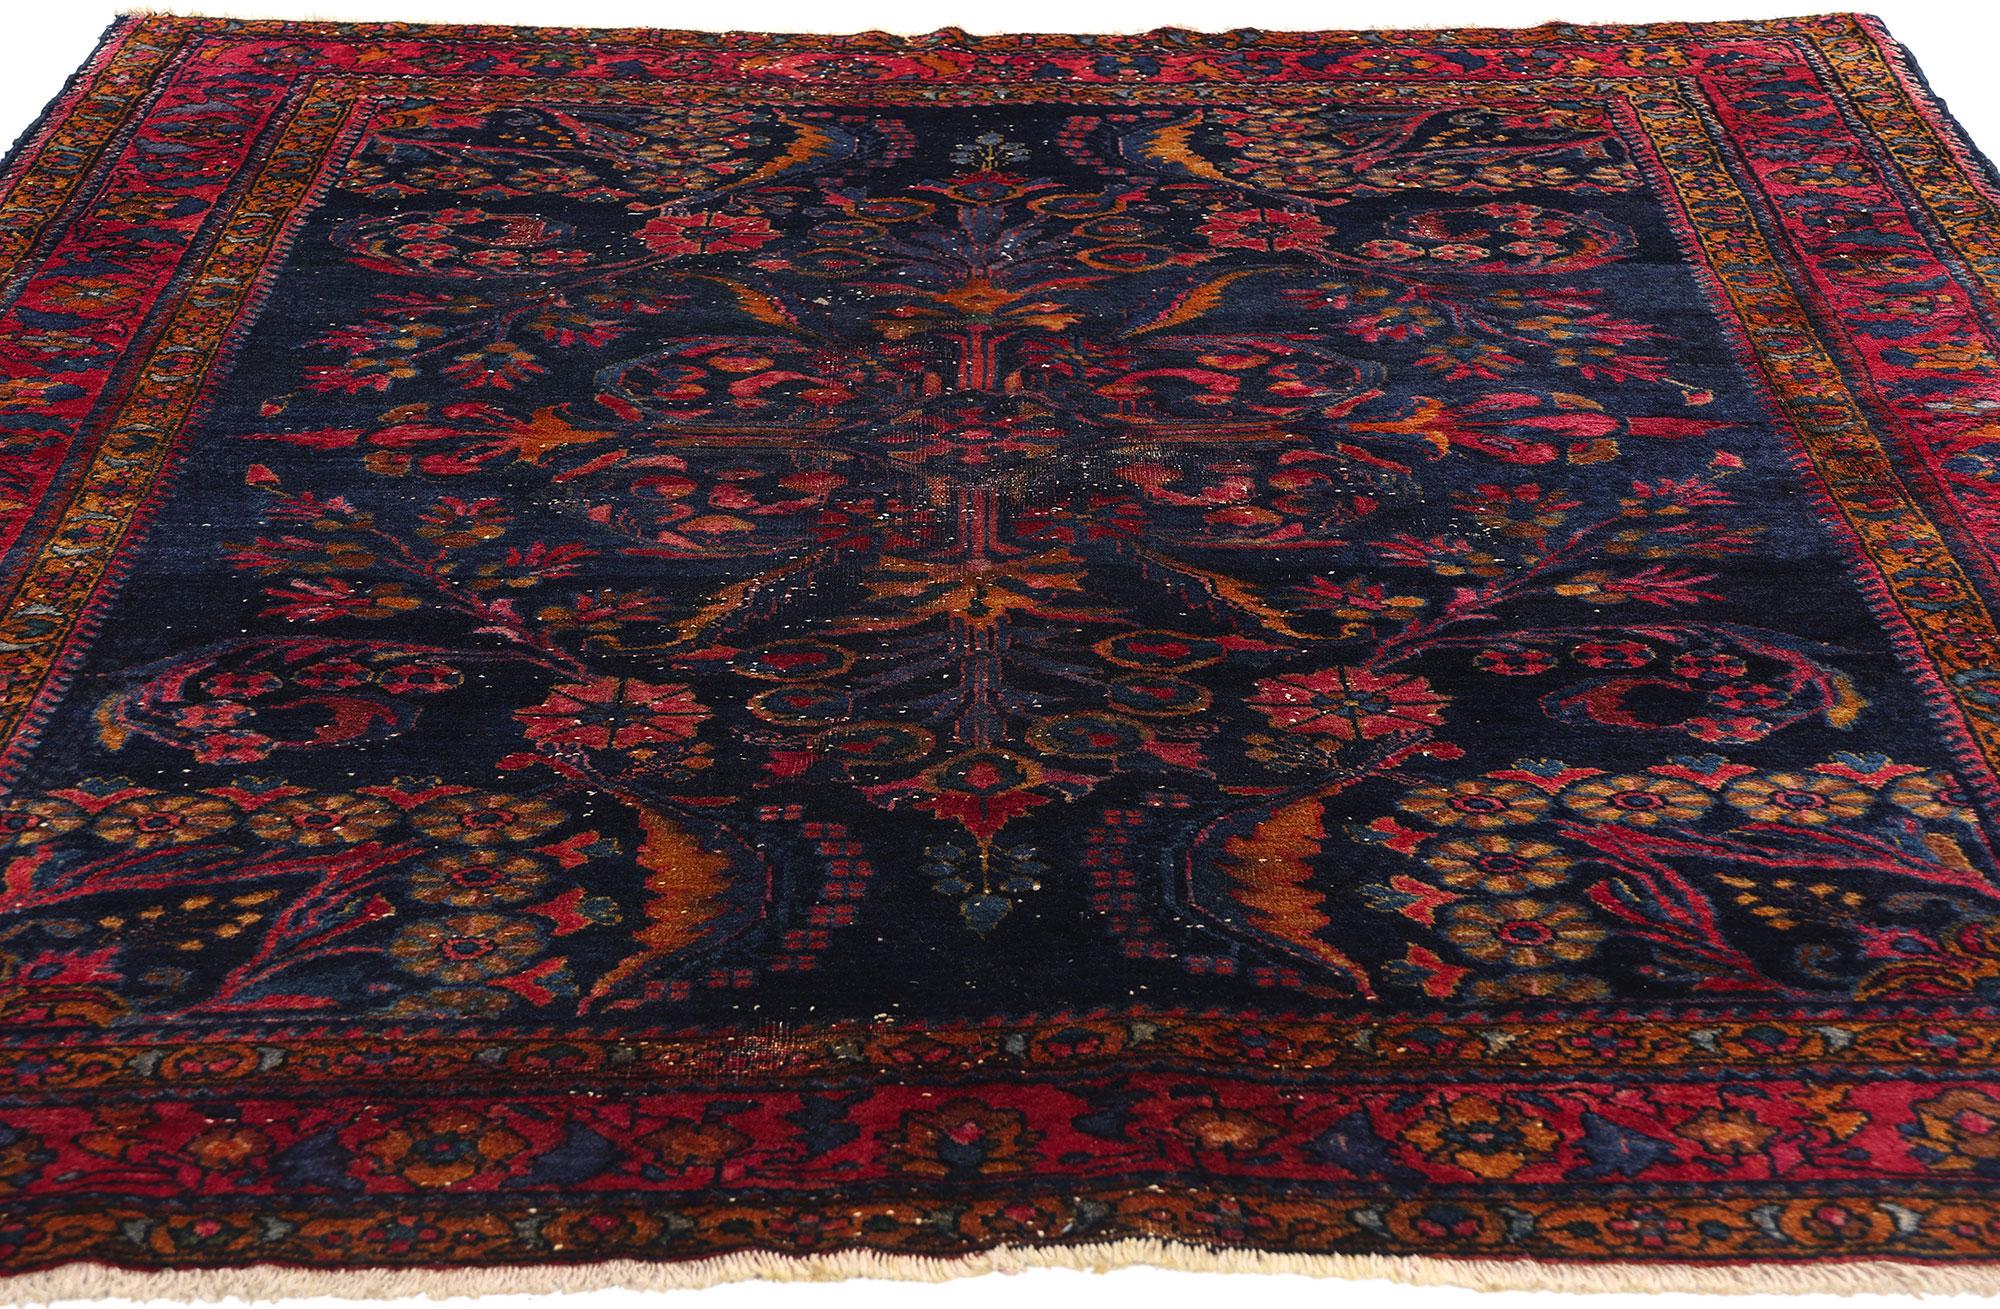 Malayer Antique Persian Lilihan Rug with Old World Victorian Renaissance Style For Sale